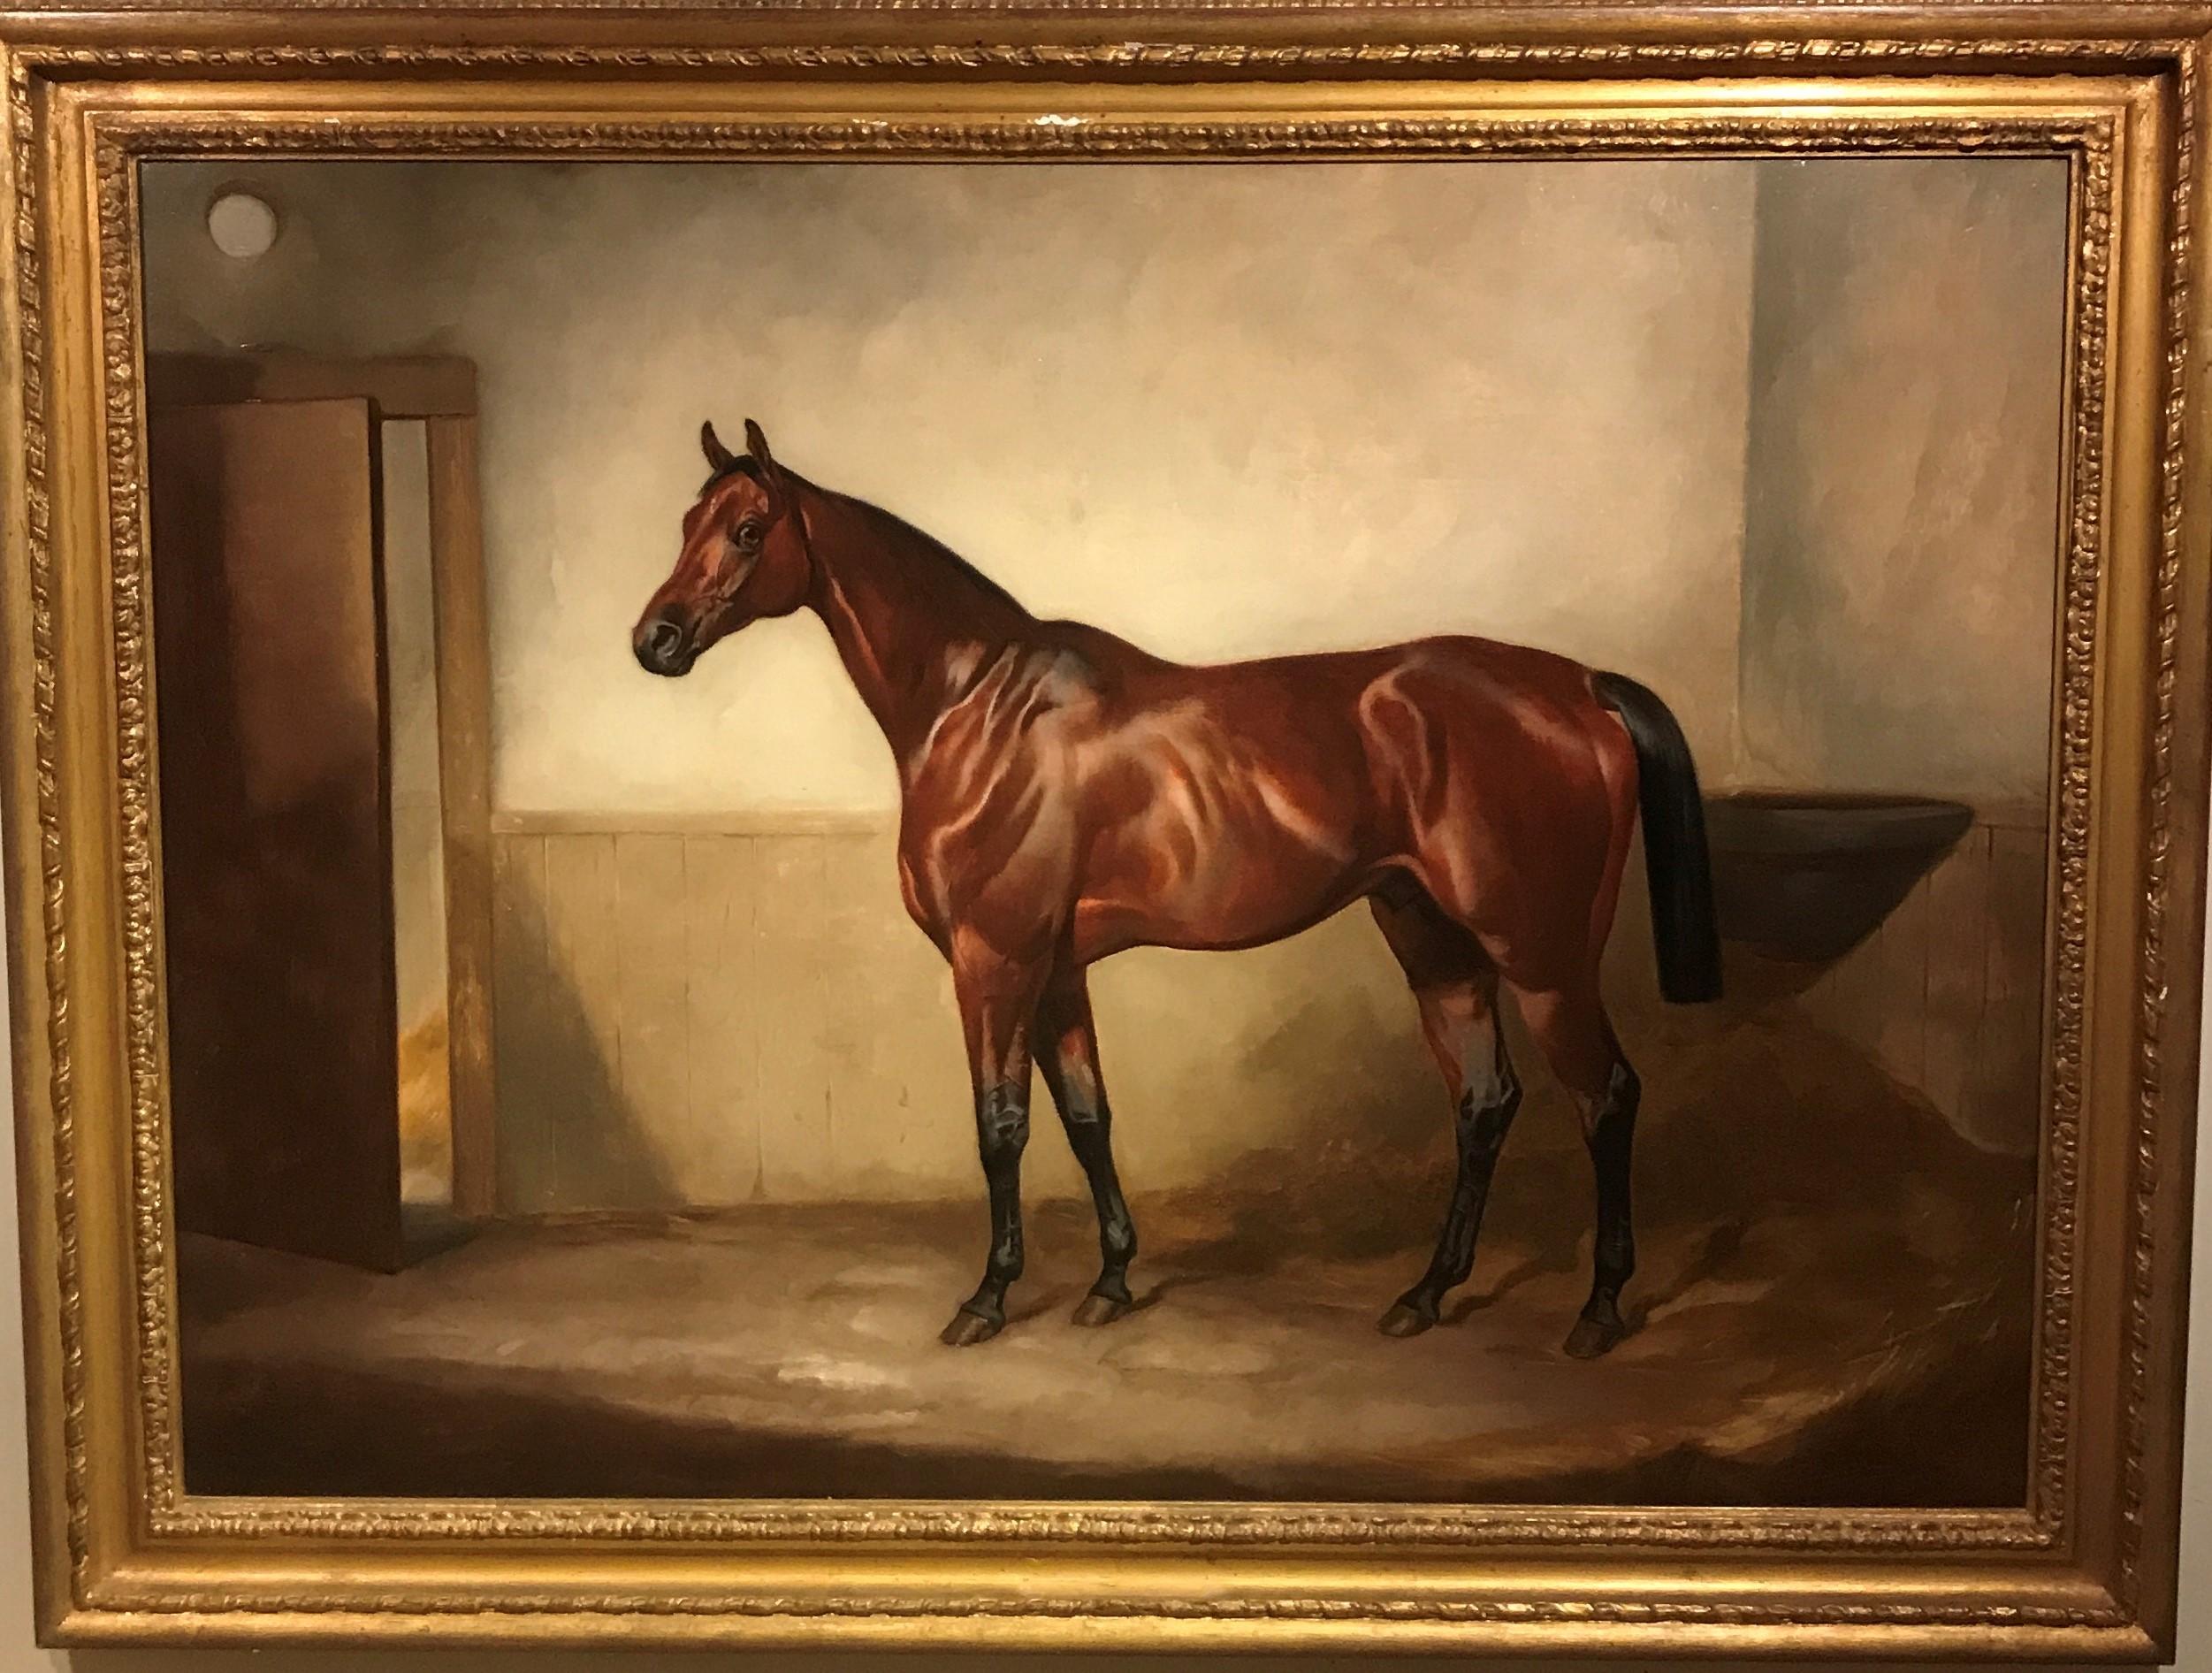 Luminous Oil Painting of a Horse by John Alfred Wheeler 'Bay Hunter'